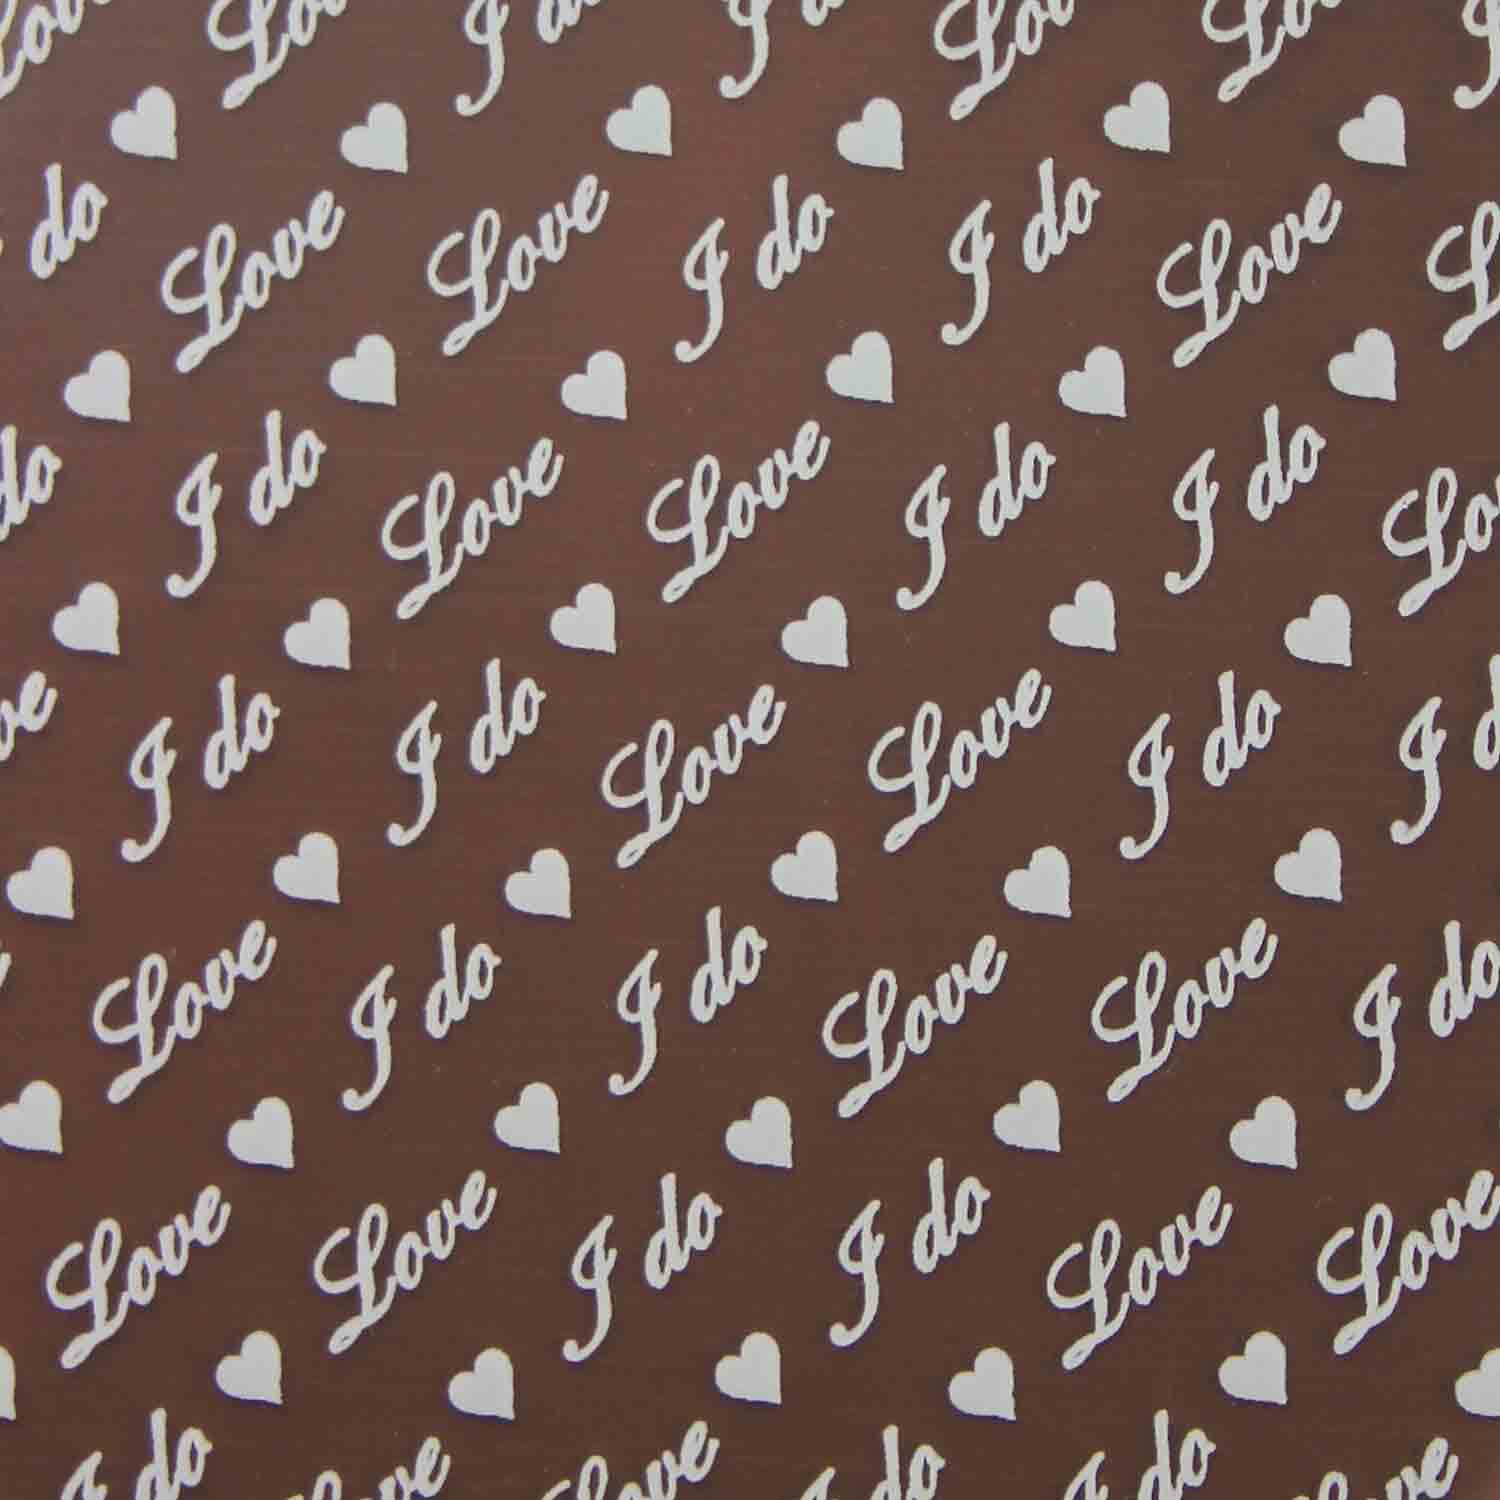 Chocolate Transfer Sheet - I Do, Love - Country Kitchen